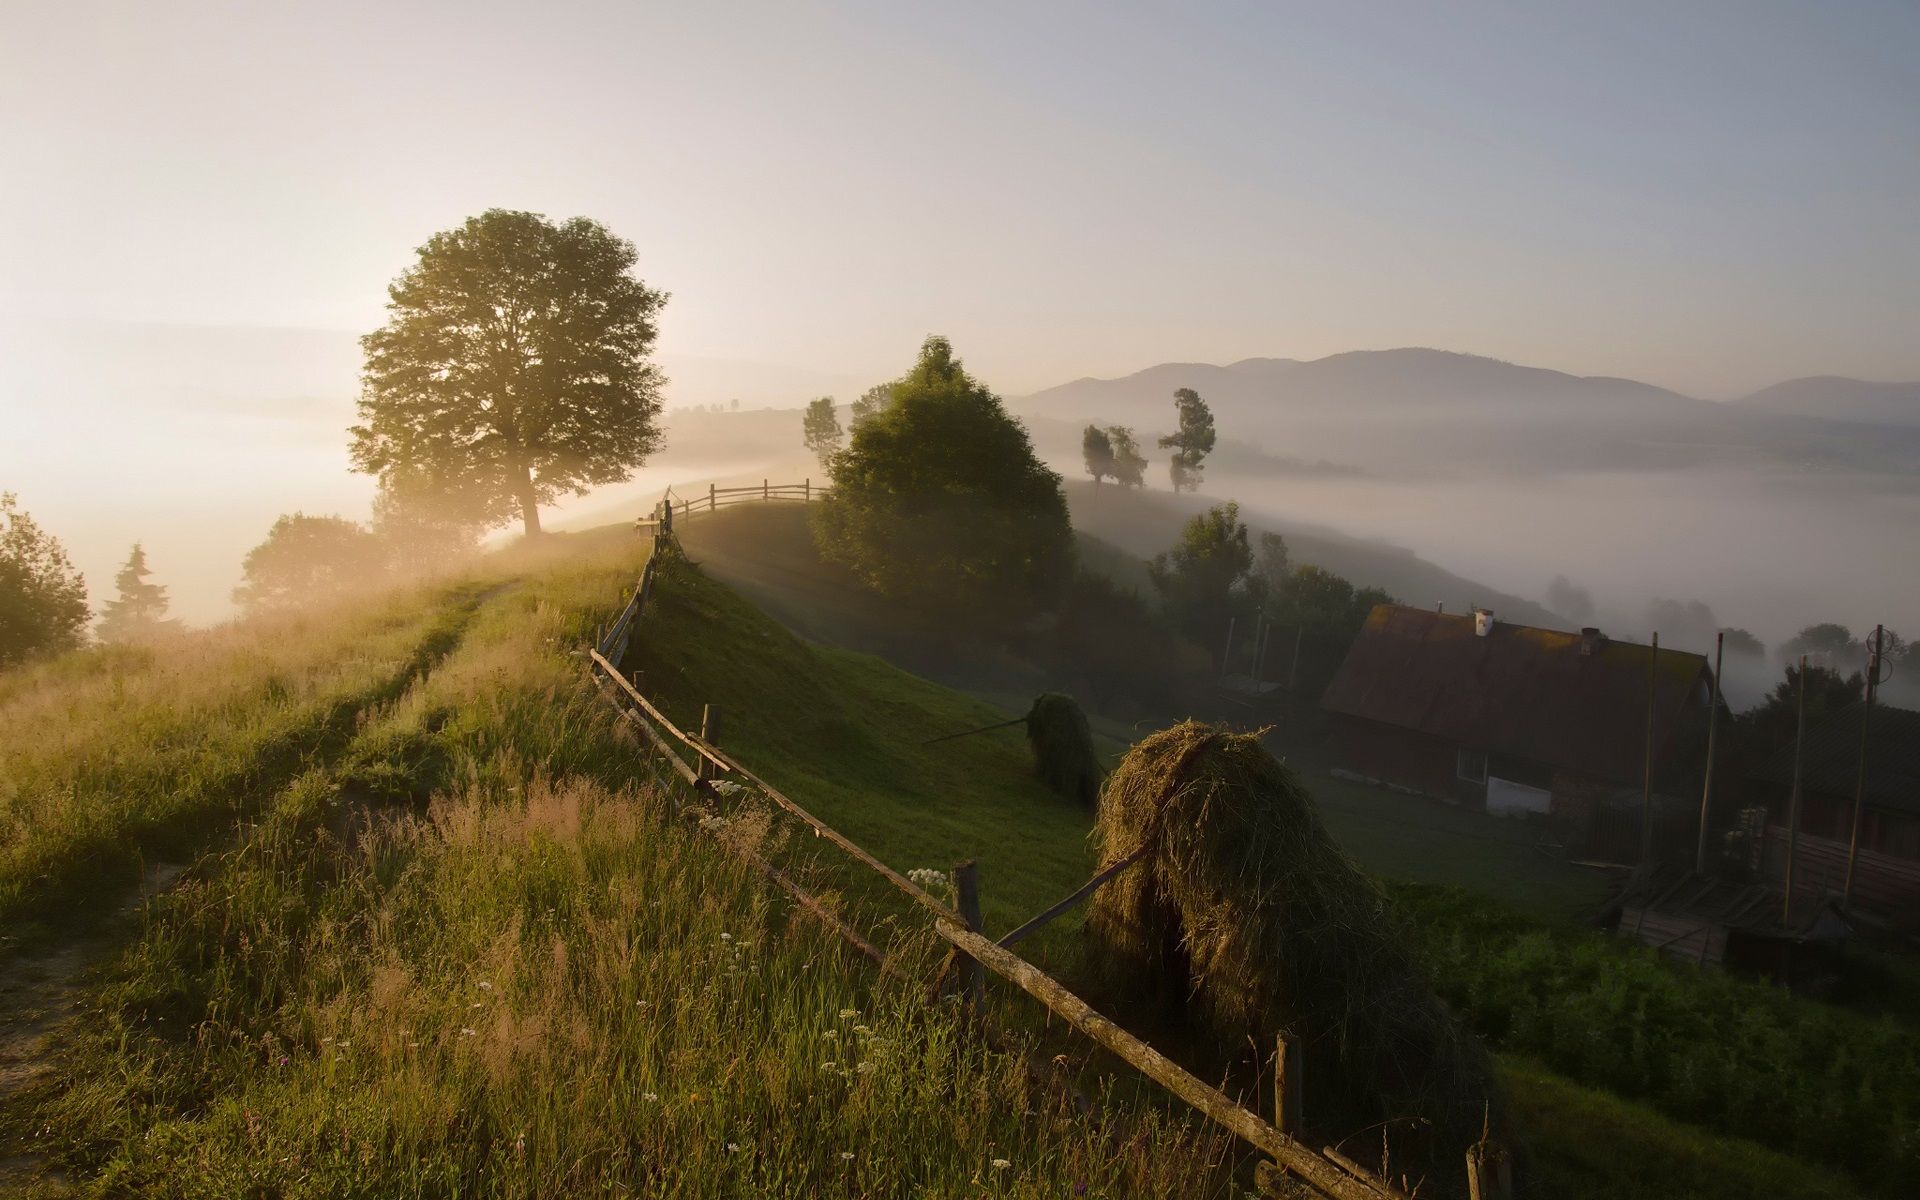 1920x1200 Wallpaper Carpathian Mountains Trees Countryside Morning Fog Summer 1920x1200 Hd Picture Image